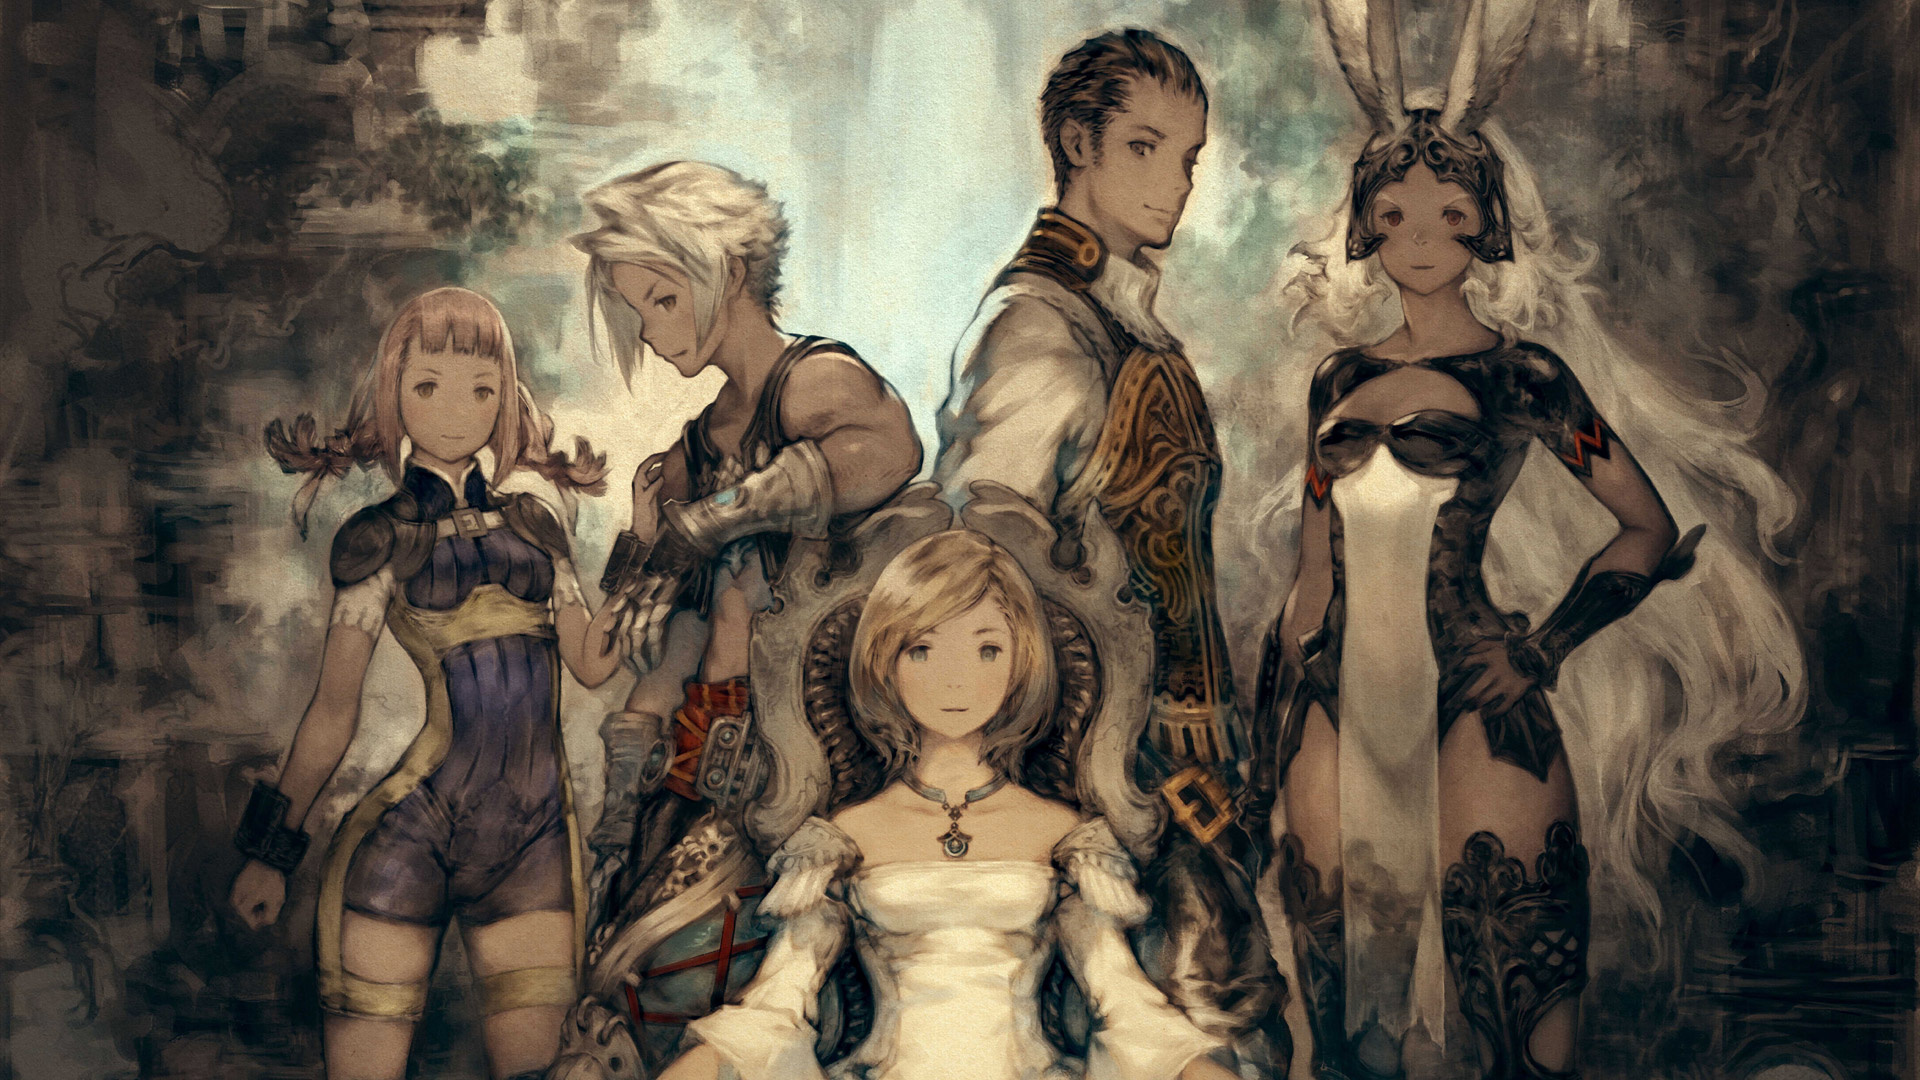 Final Fantasy Xii The Zodiac Age Has Just Been Patched For The First Time In A Year Push Square